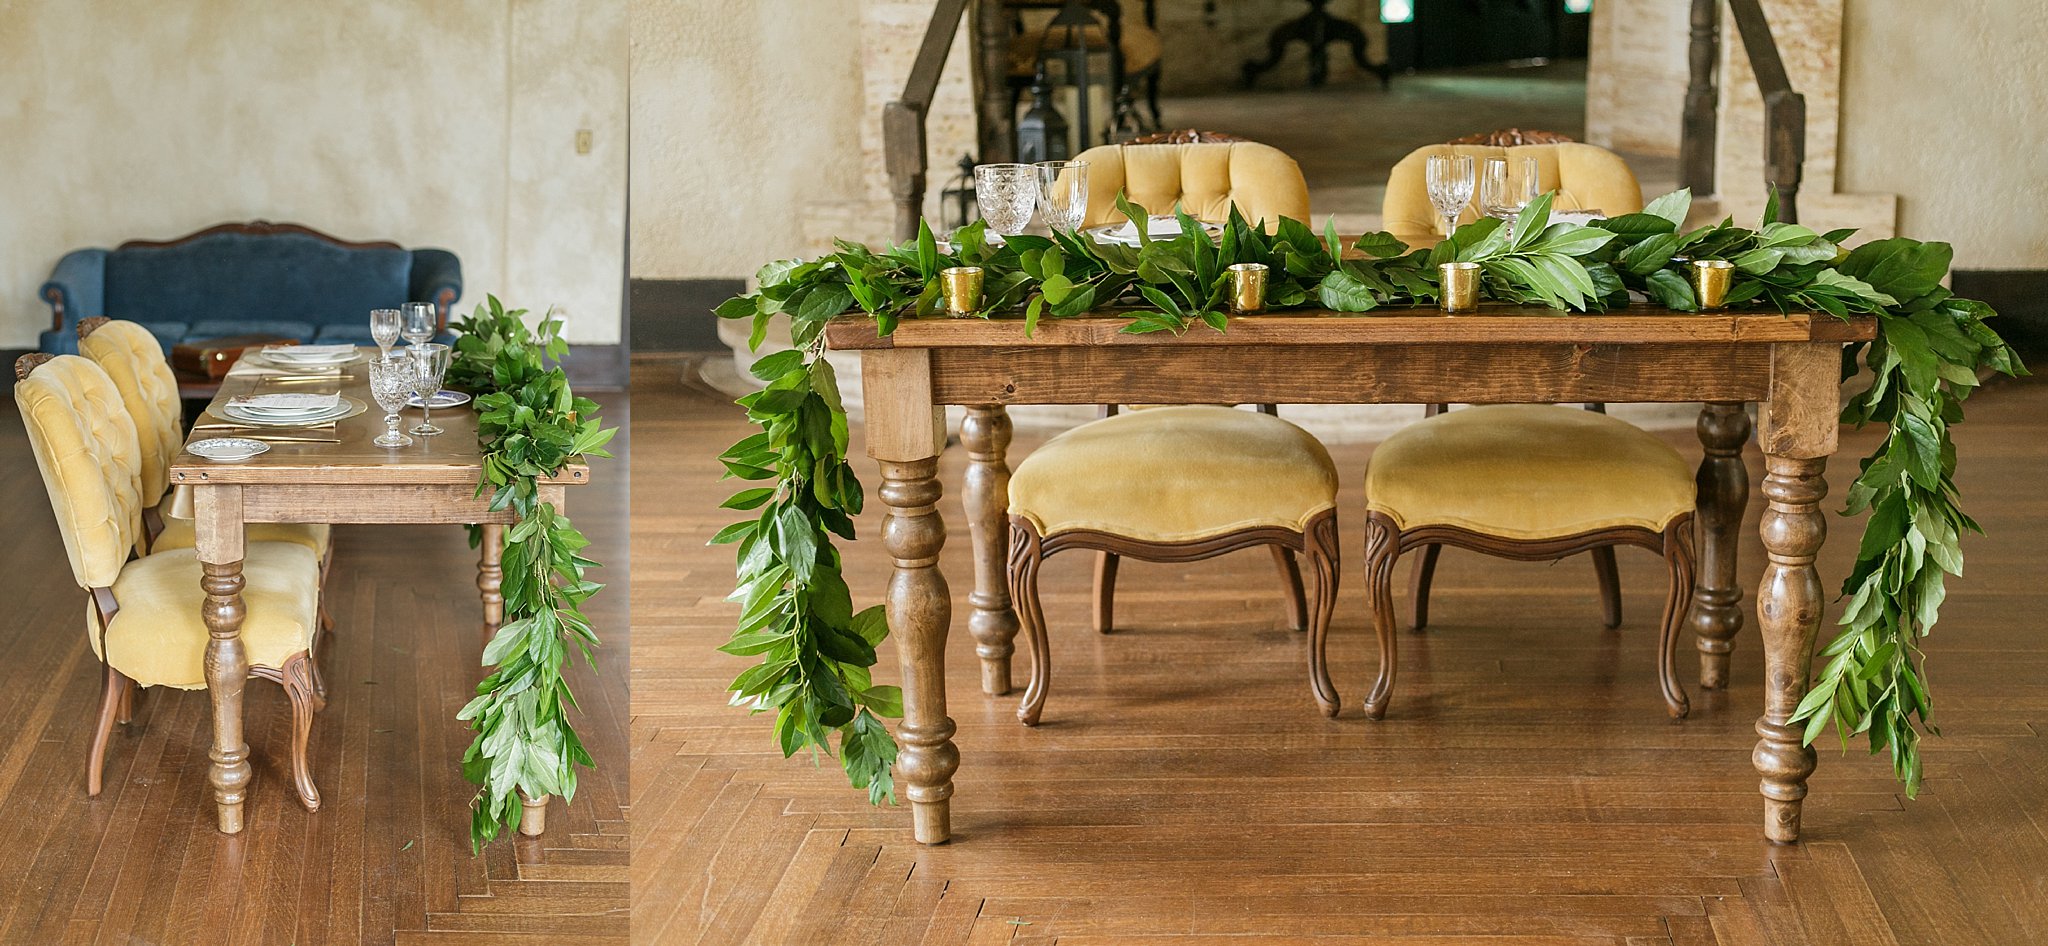 Sweetheart table with greenery and gold details.